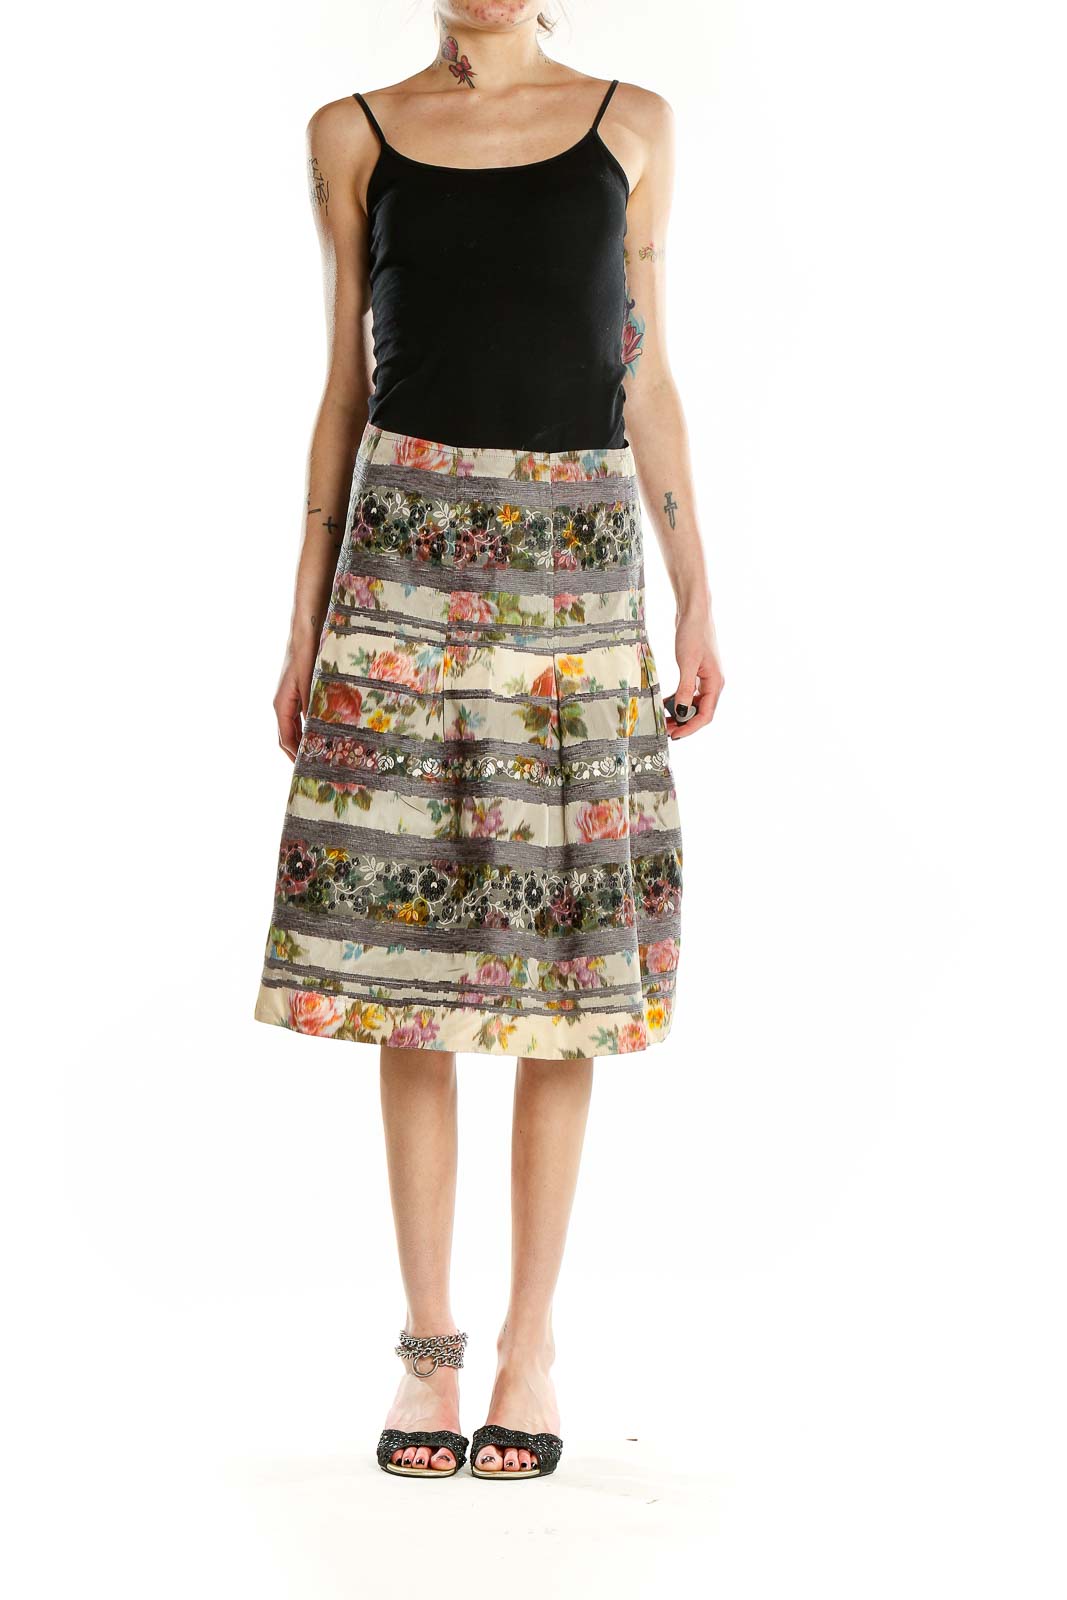 Cash or Shop | SilkRoll Skirts Points With